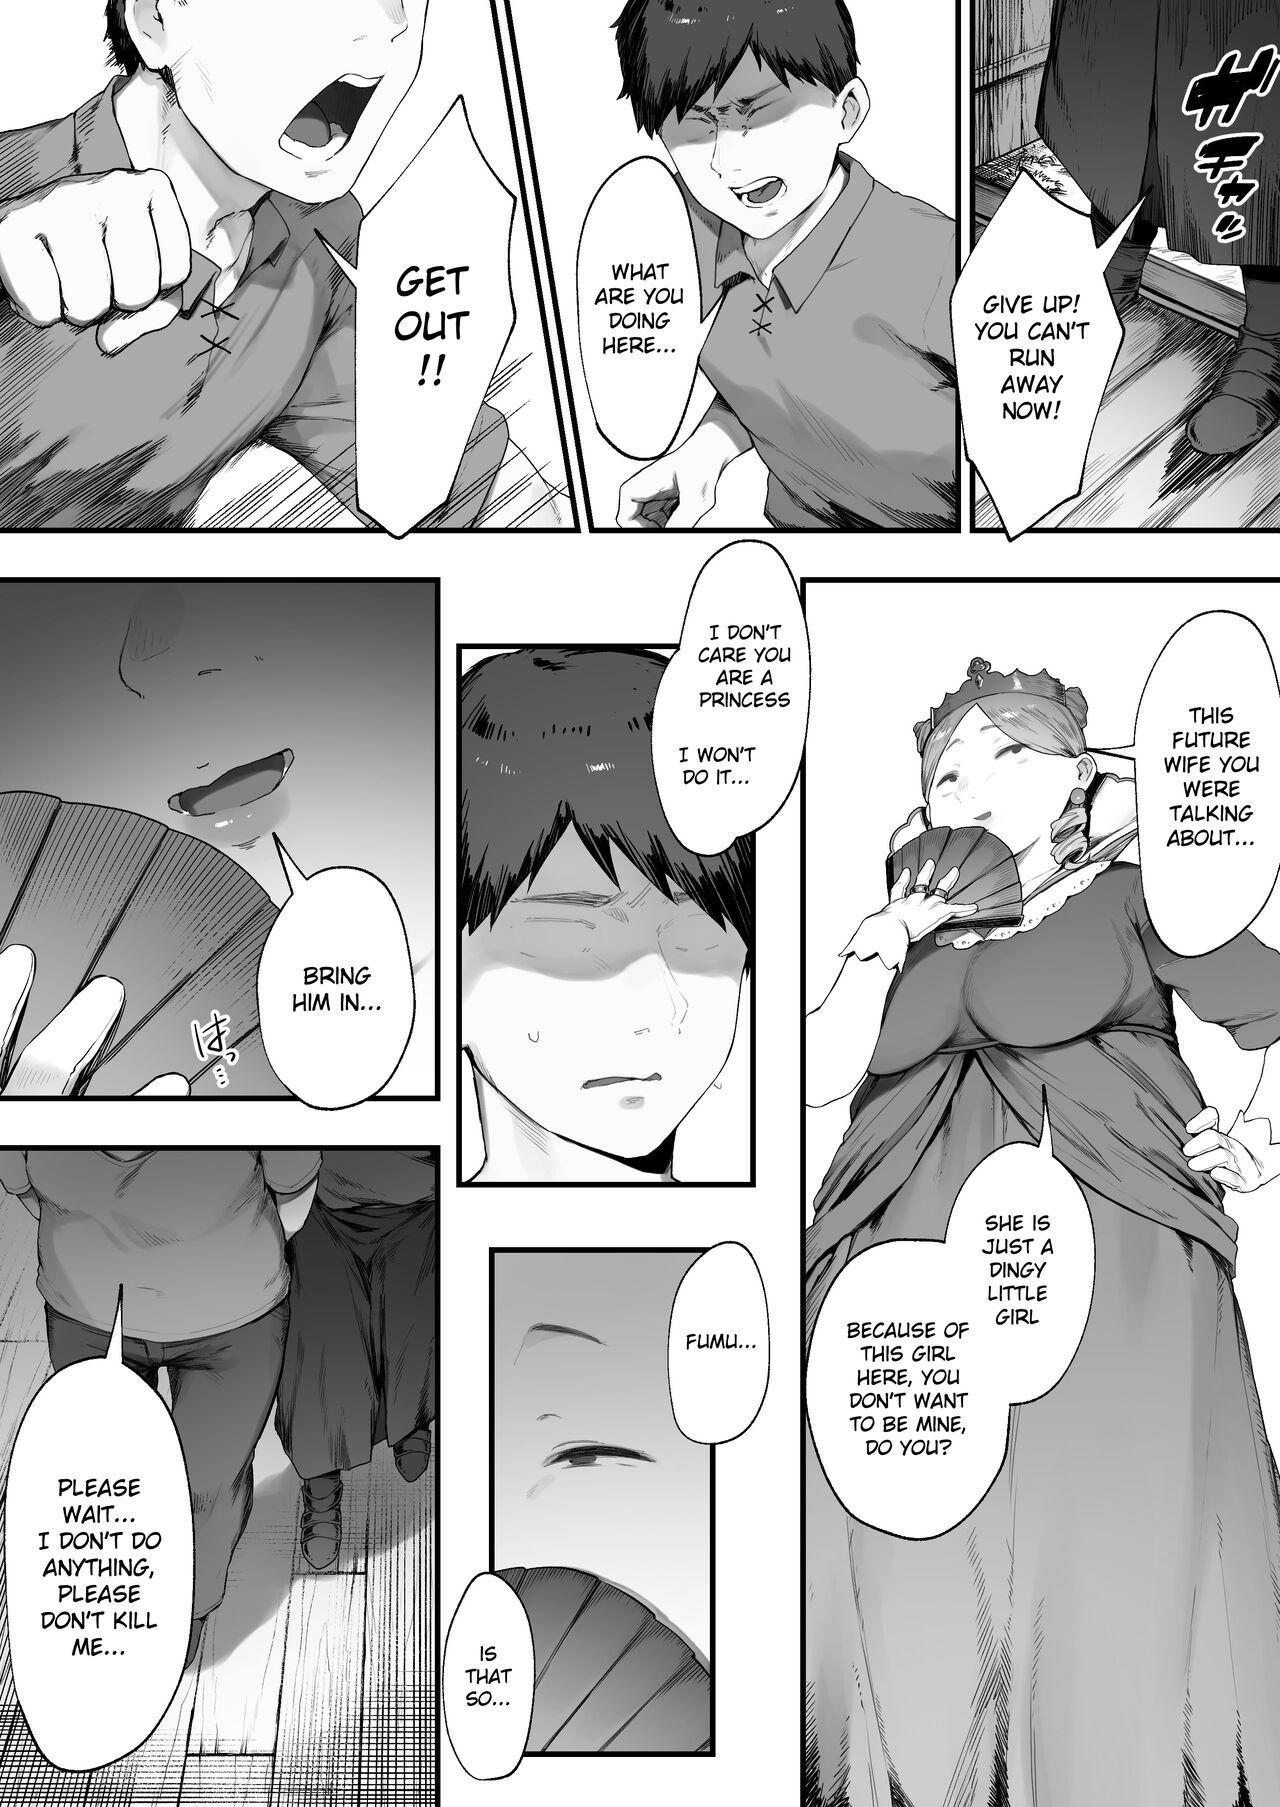 Cougar Oujo no Meirei de Stalker to Kekkon Saserareru Hanashi 1 | A story about being married to a stalker by the order of a princess 1 - Original Flaquita - Page 7